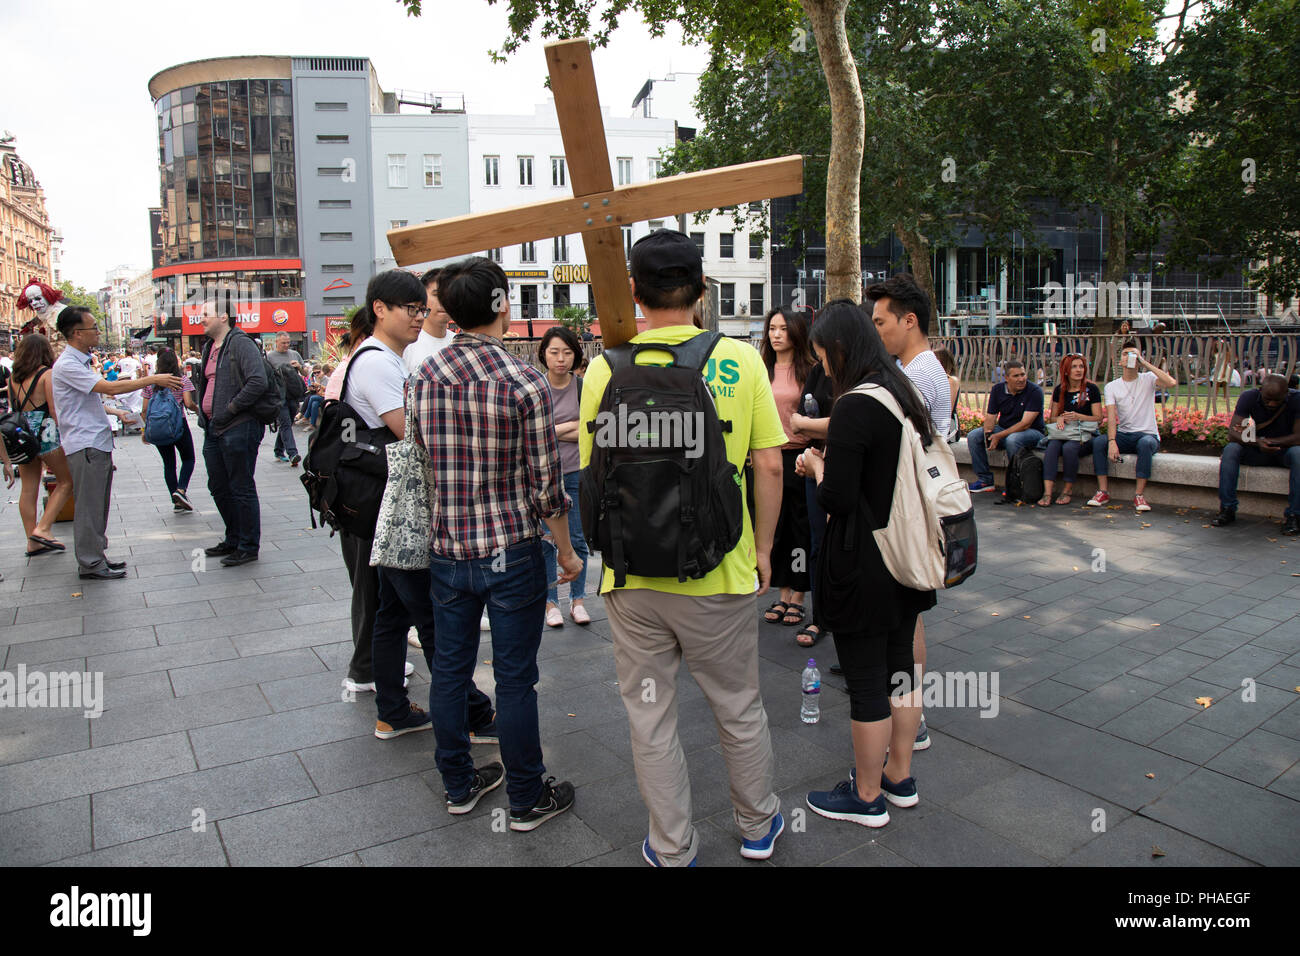 A group of young Koreans in Leicester Square pray and gently spread their faith in Christ and Christianity in London, United Kingdom. Carrying a wooden cross to mark the life of Jesus, they gather in prayer as a very public display of their religion and religious belief. Stock Photo